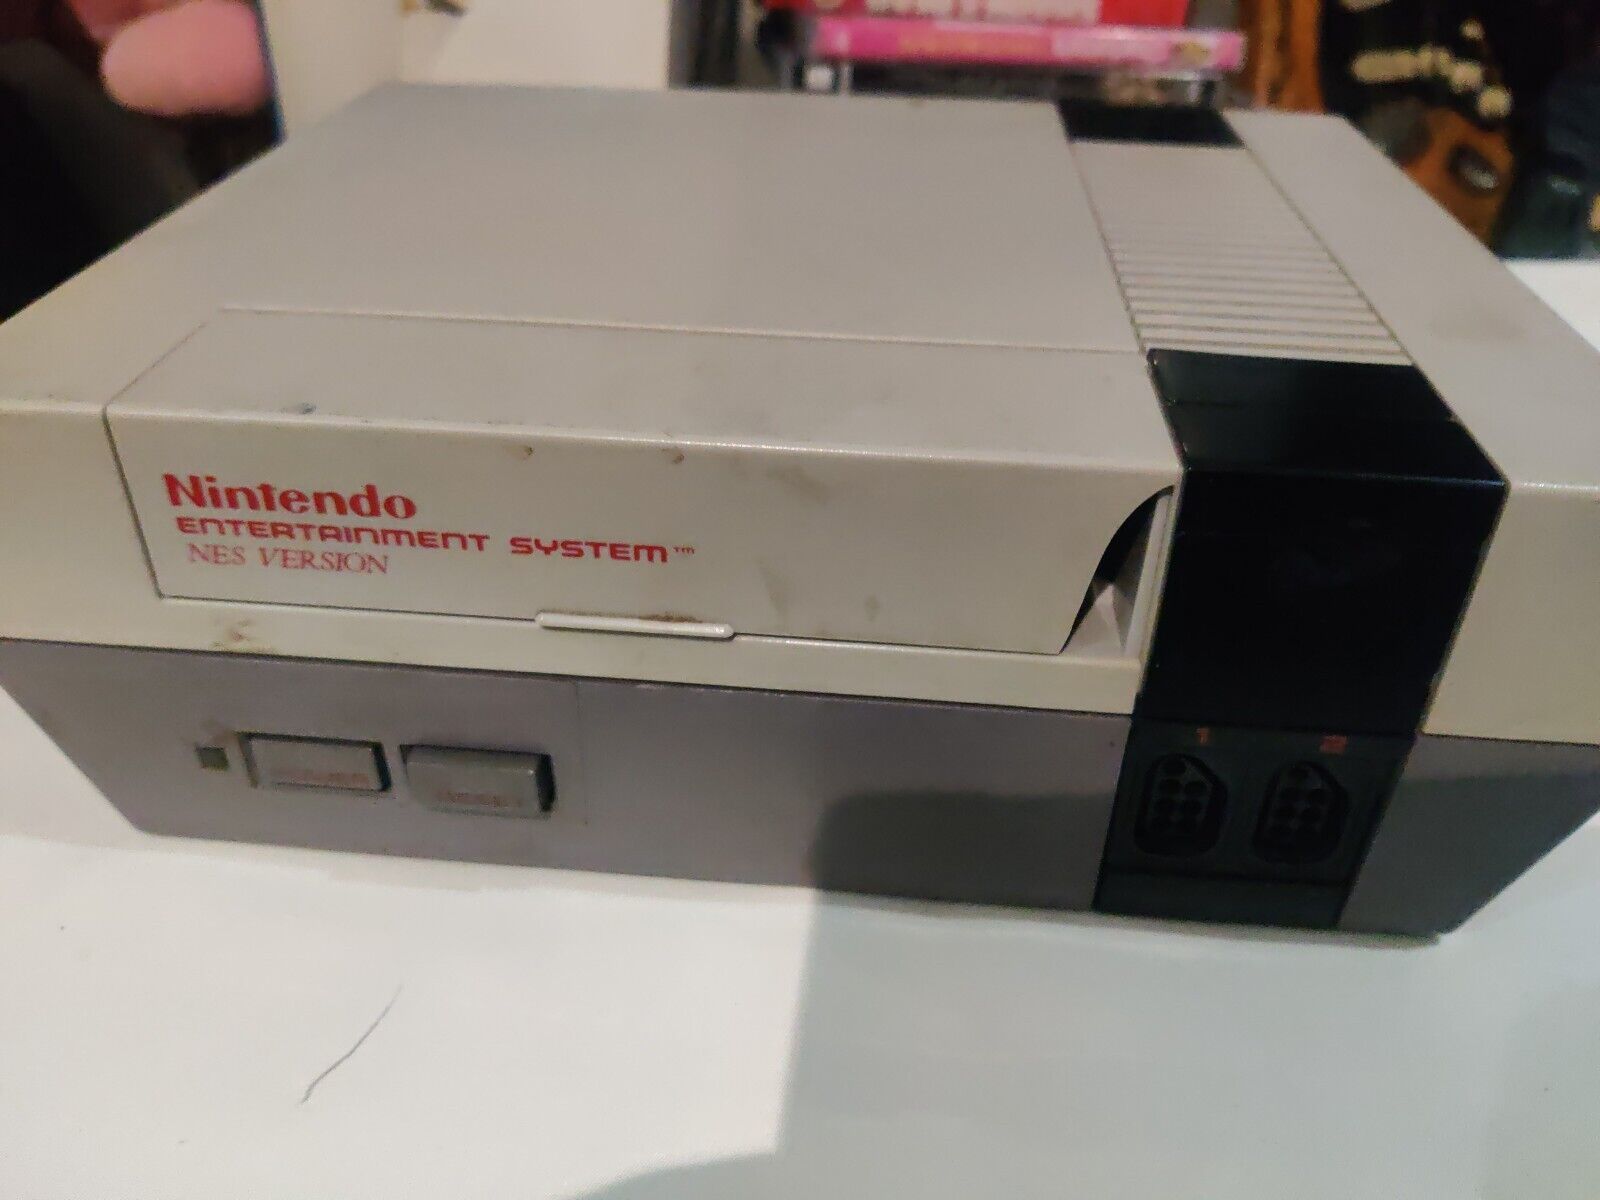 Nintendo Entertainment System - PAL - Mattel version non Tested n No Accessories - $153.00